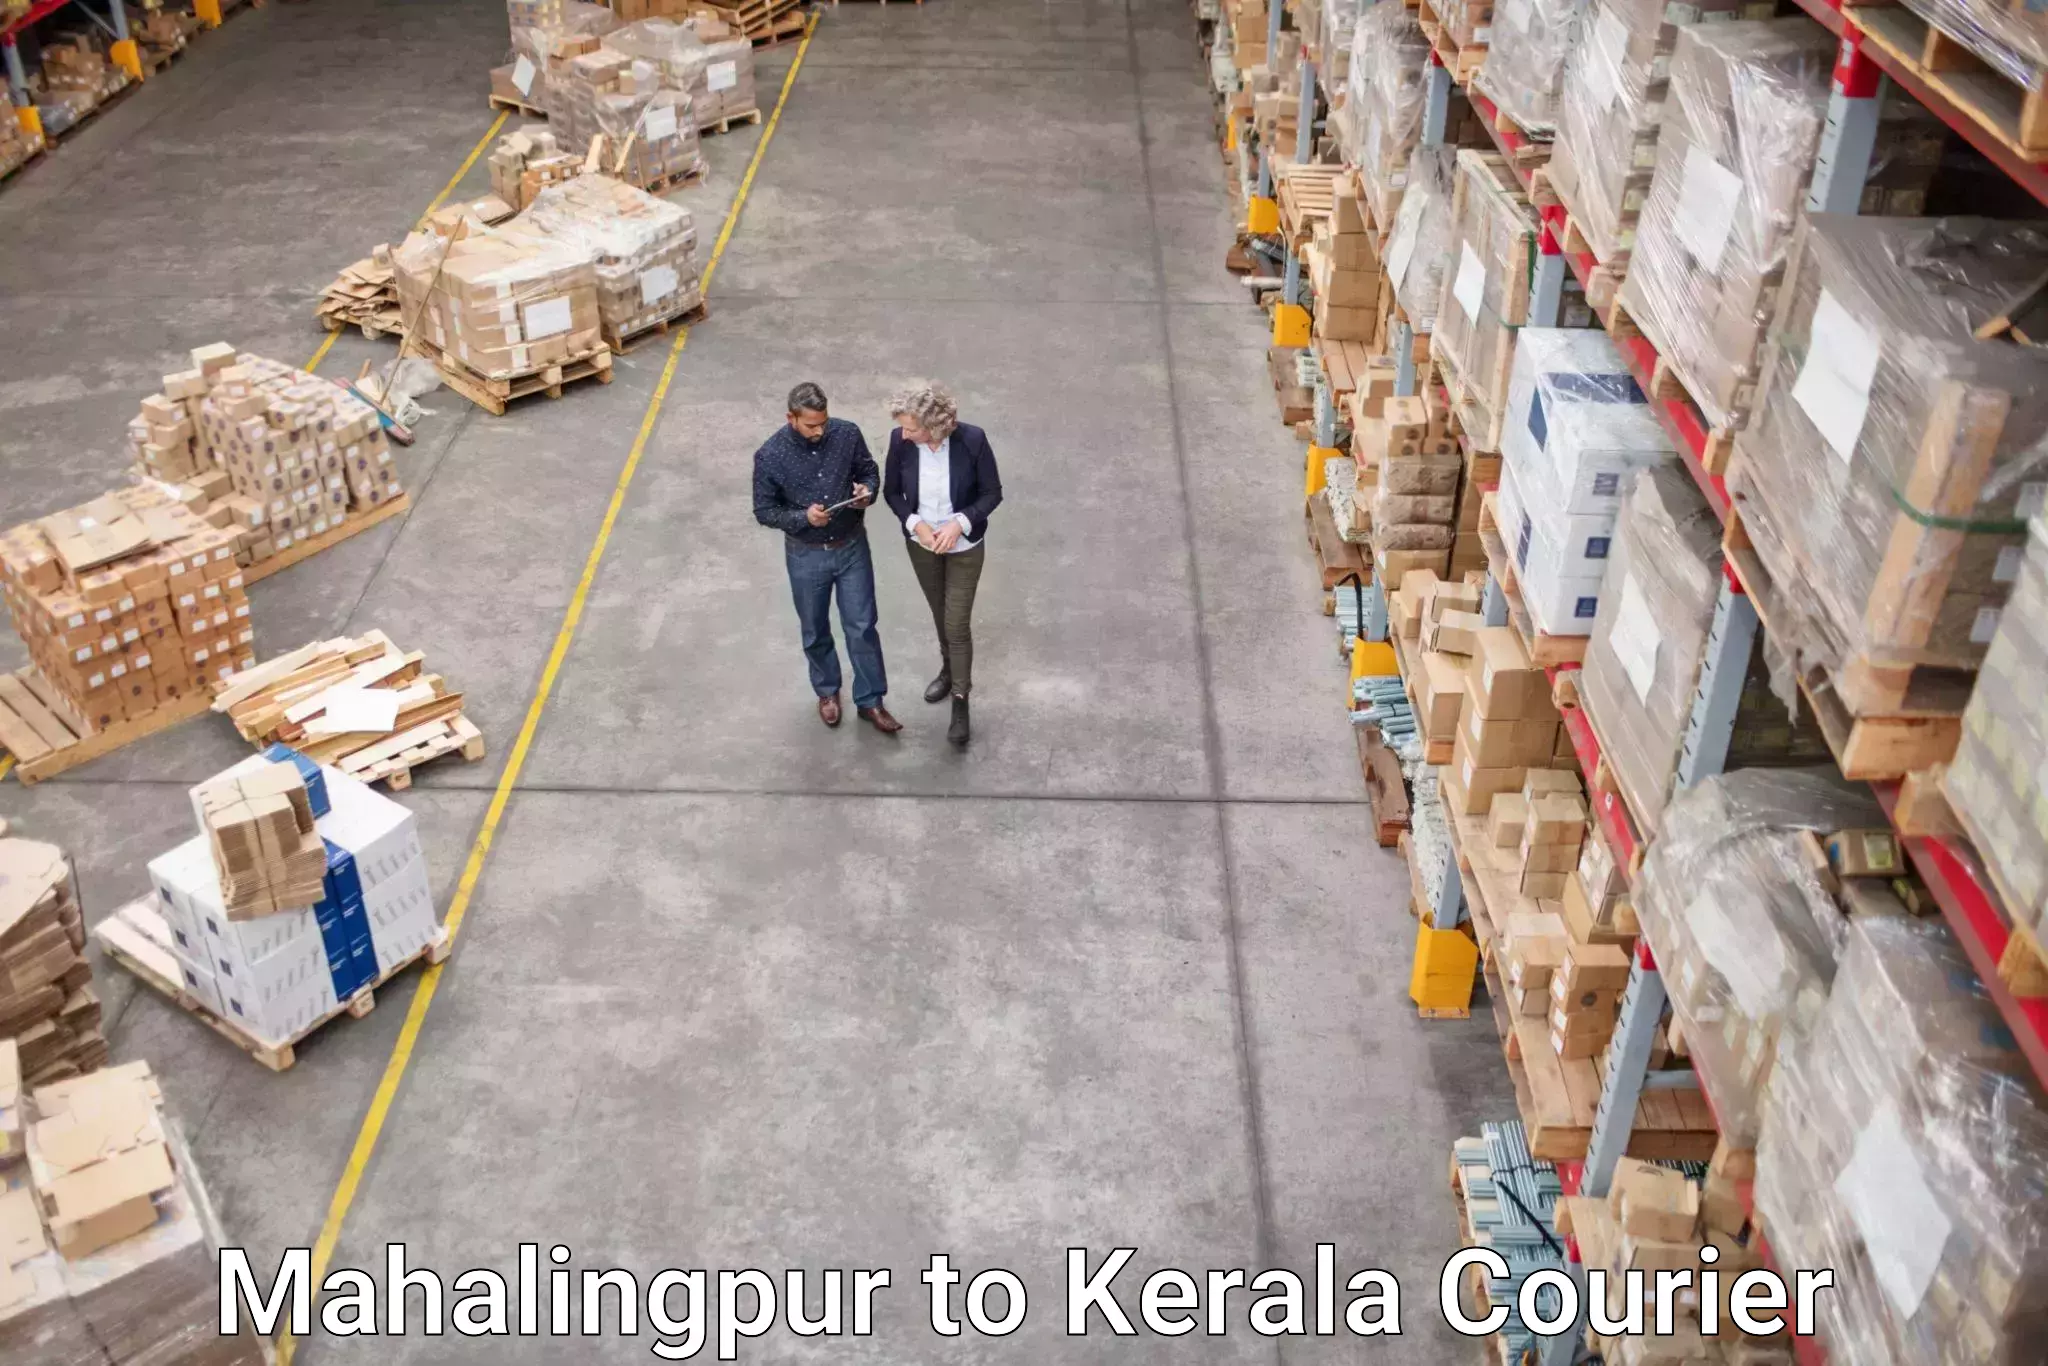 Cargo courier service Mahalingpur to Cochin University of Science and Technology